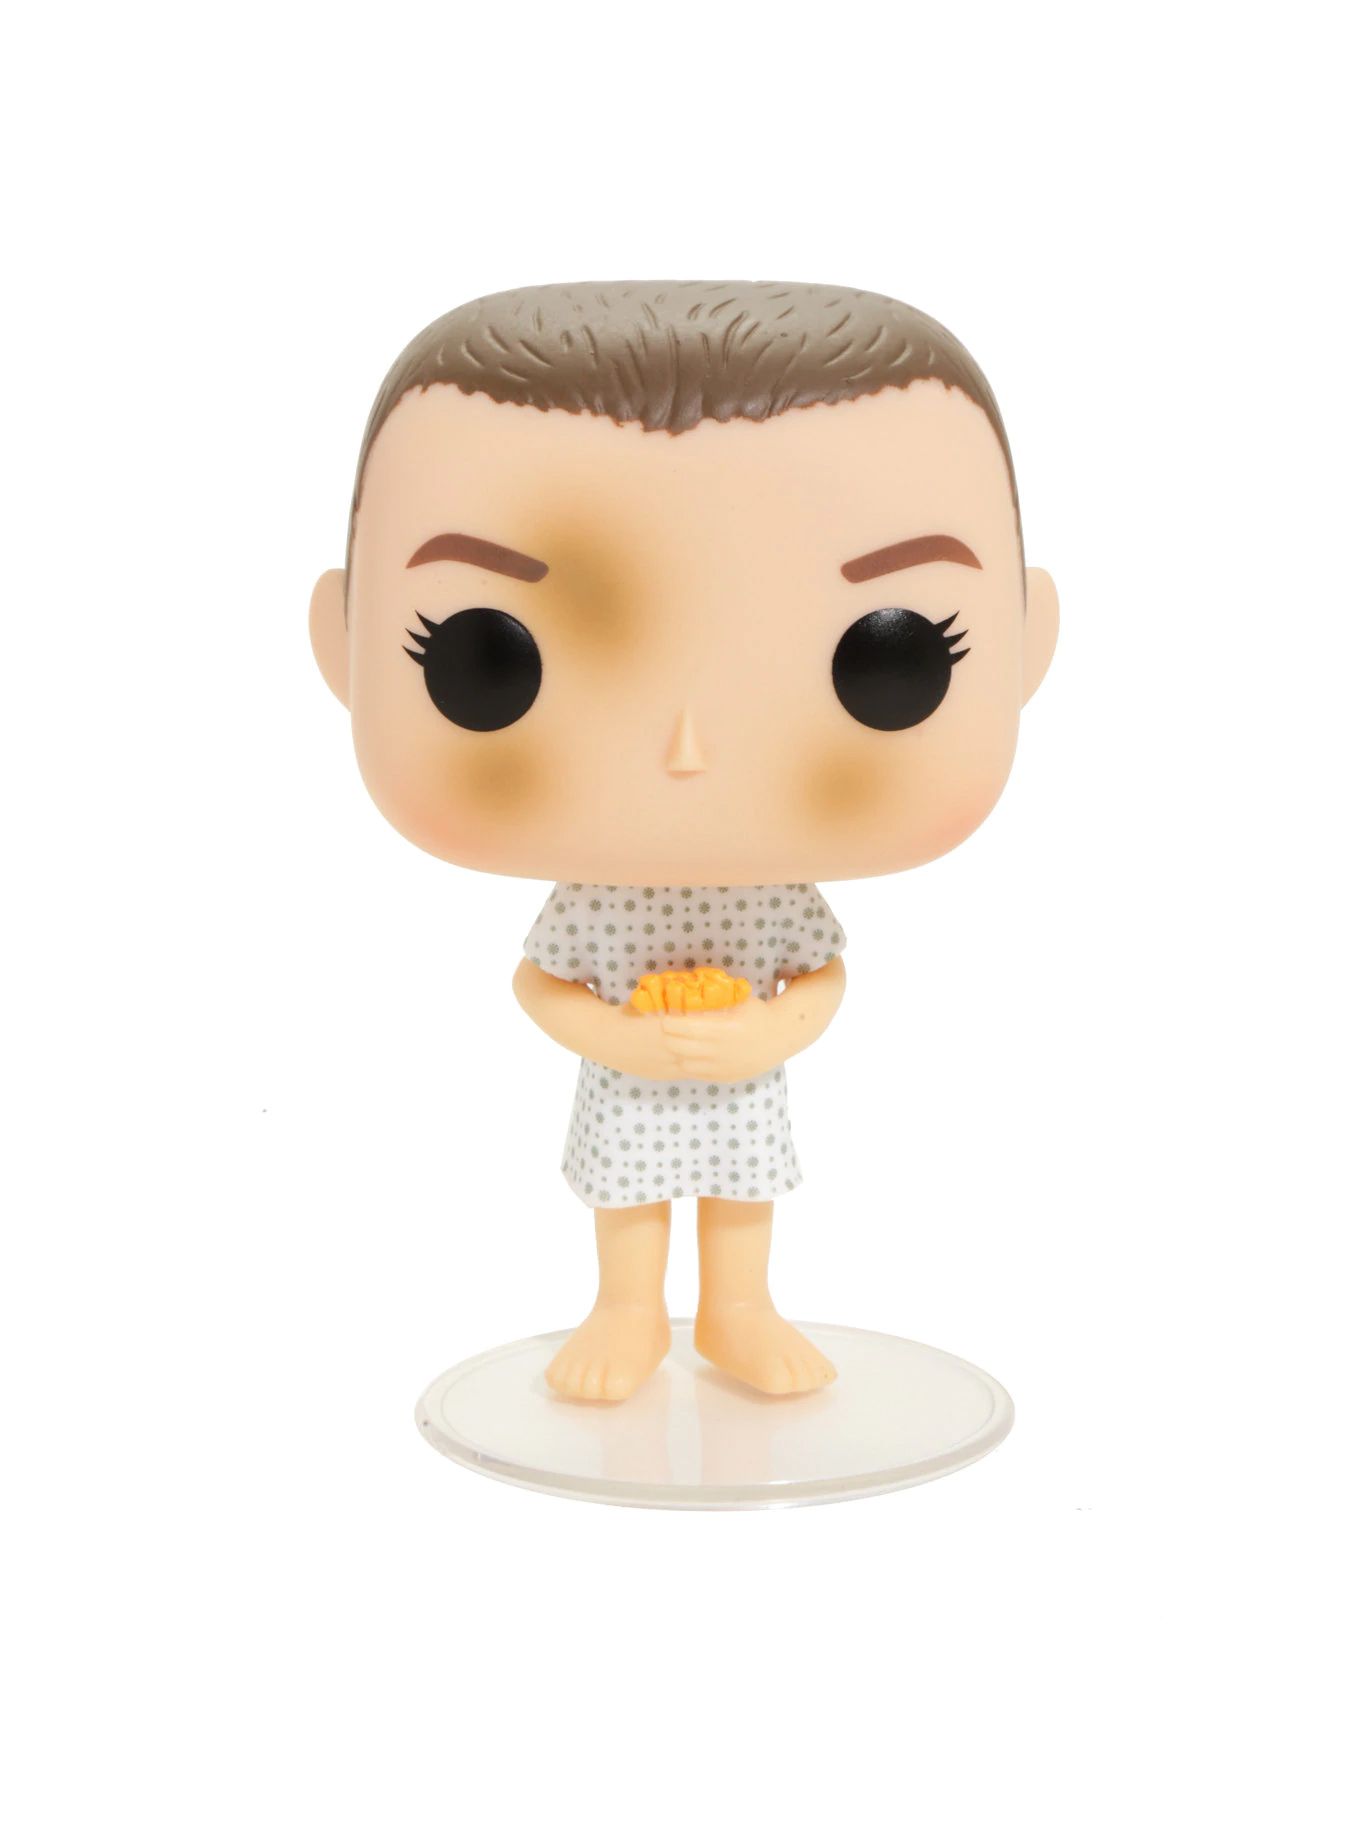 Eleven (Hospital Gown) #511 - Stranger Things - Funko Pop! Television